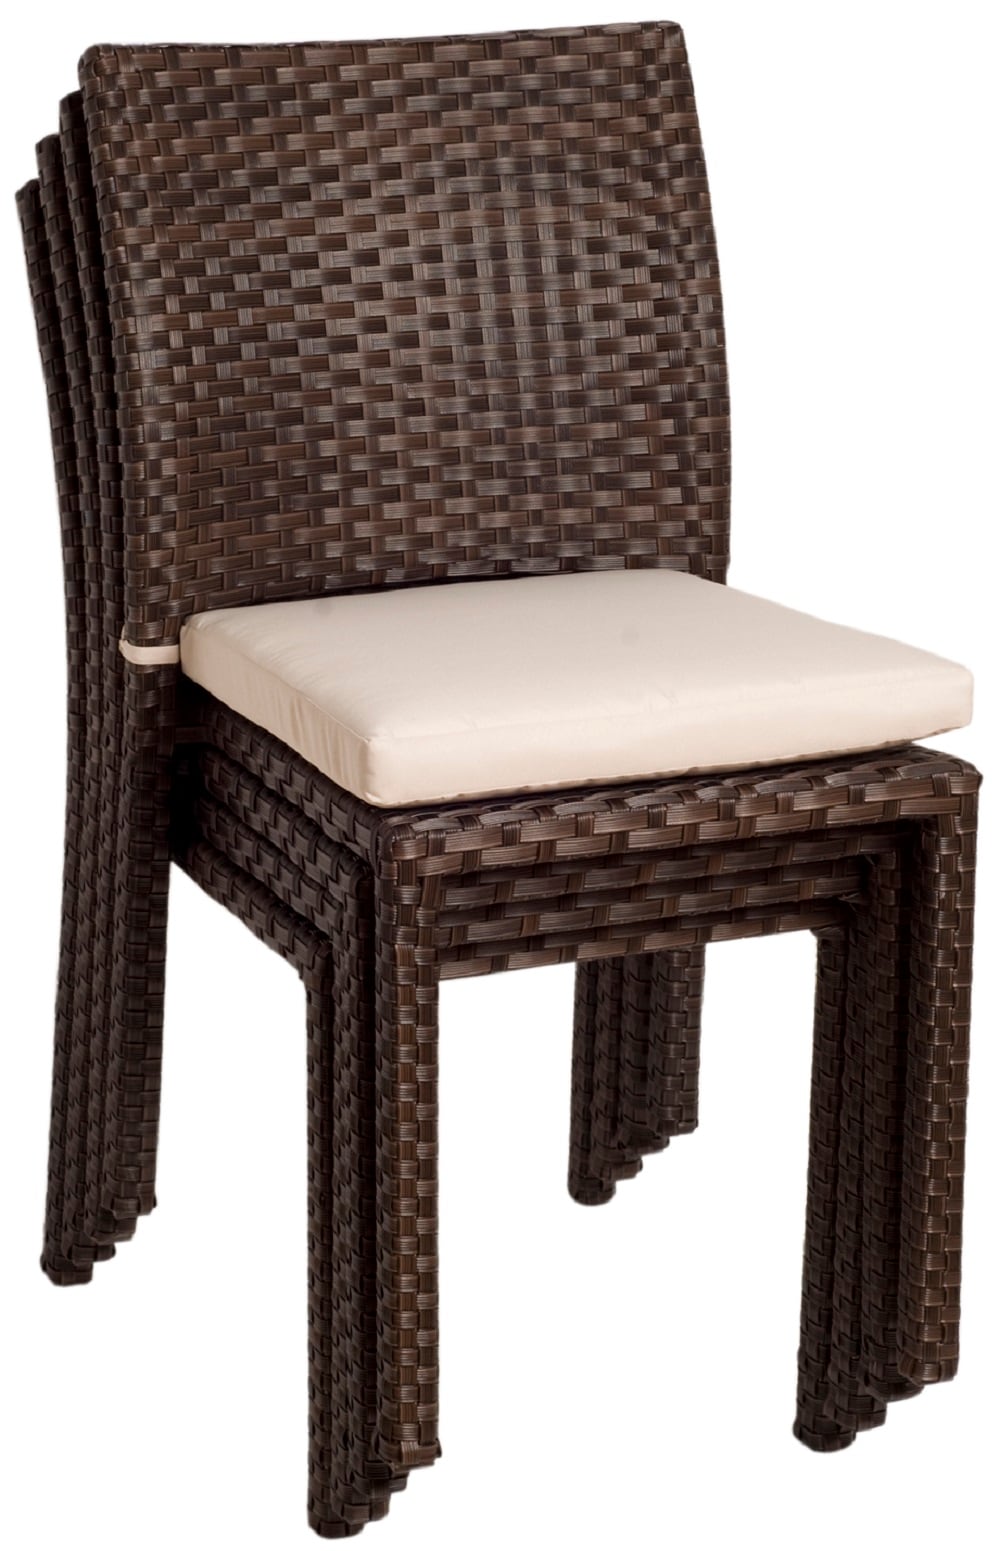 Envelor Luxemburg 7 Piece Brown Wicker Patio Dining Set With 6 Stationary Chairs With Off White